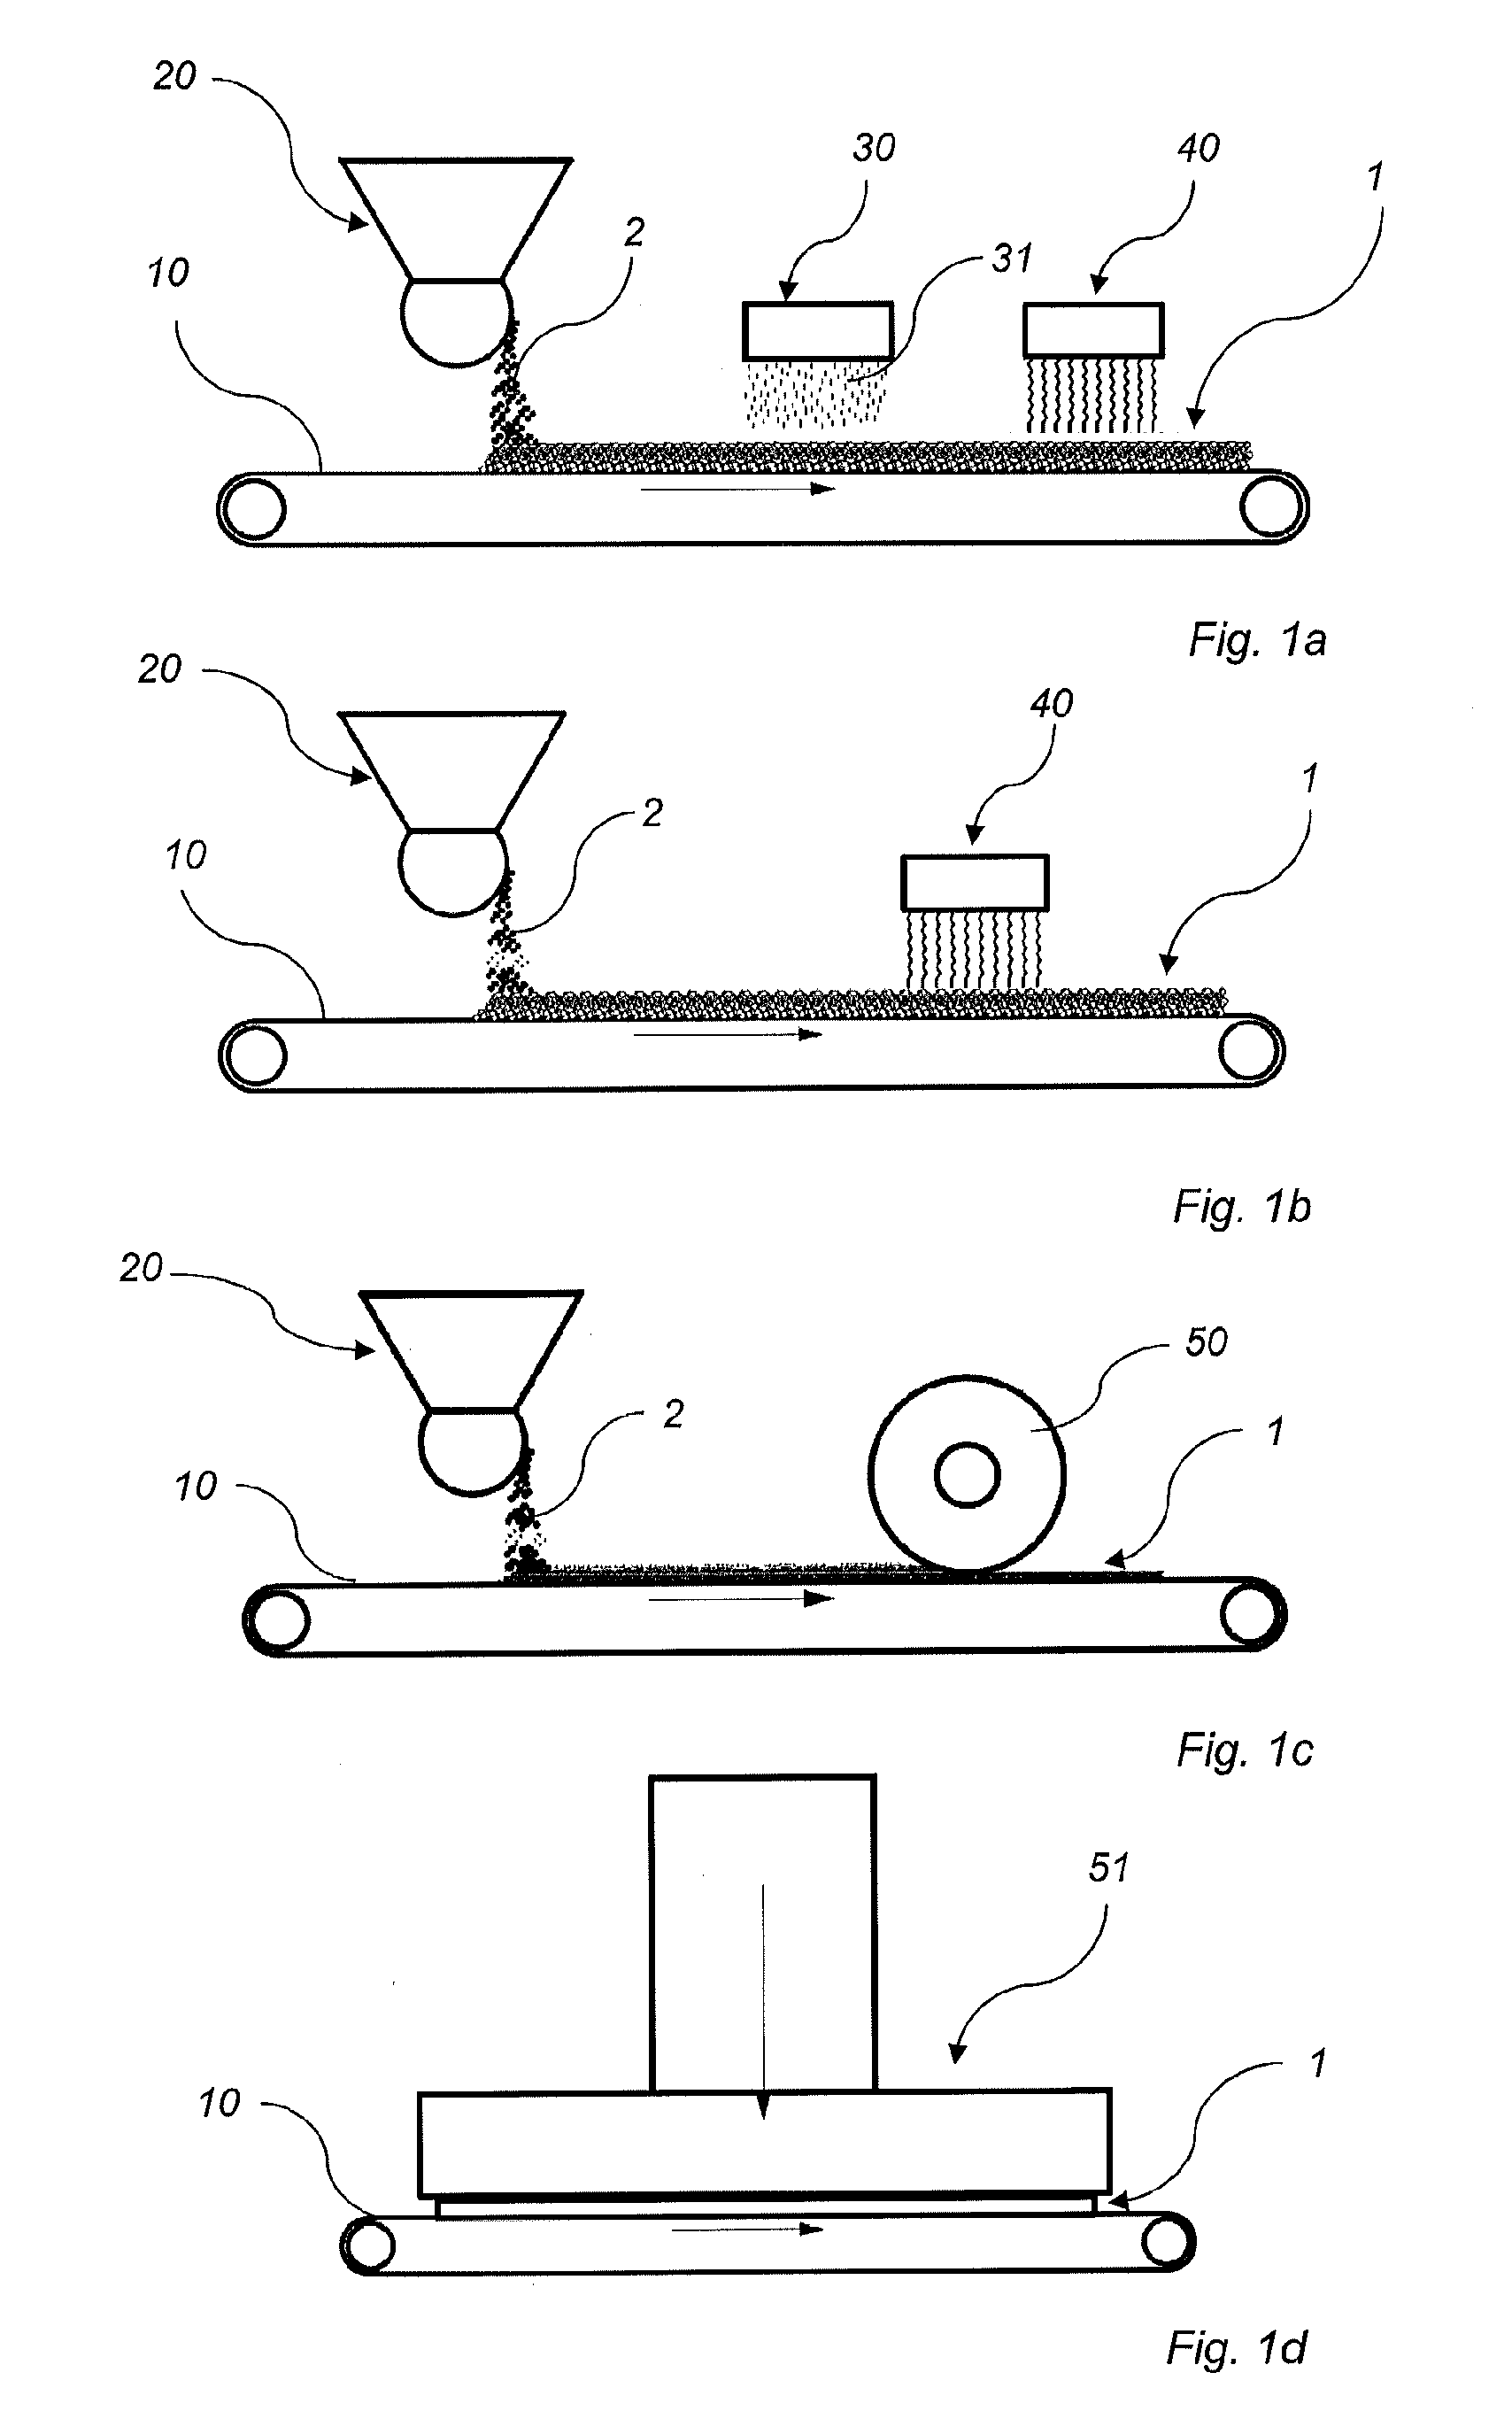 Method of manufacturing a layer